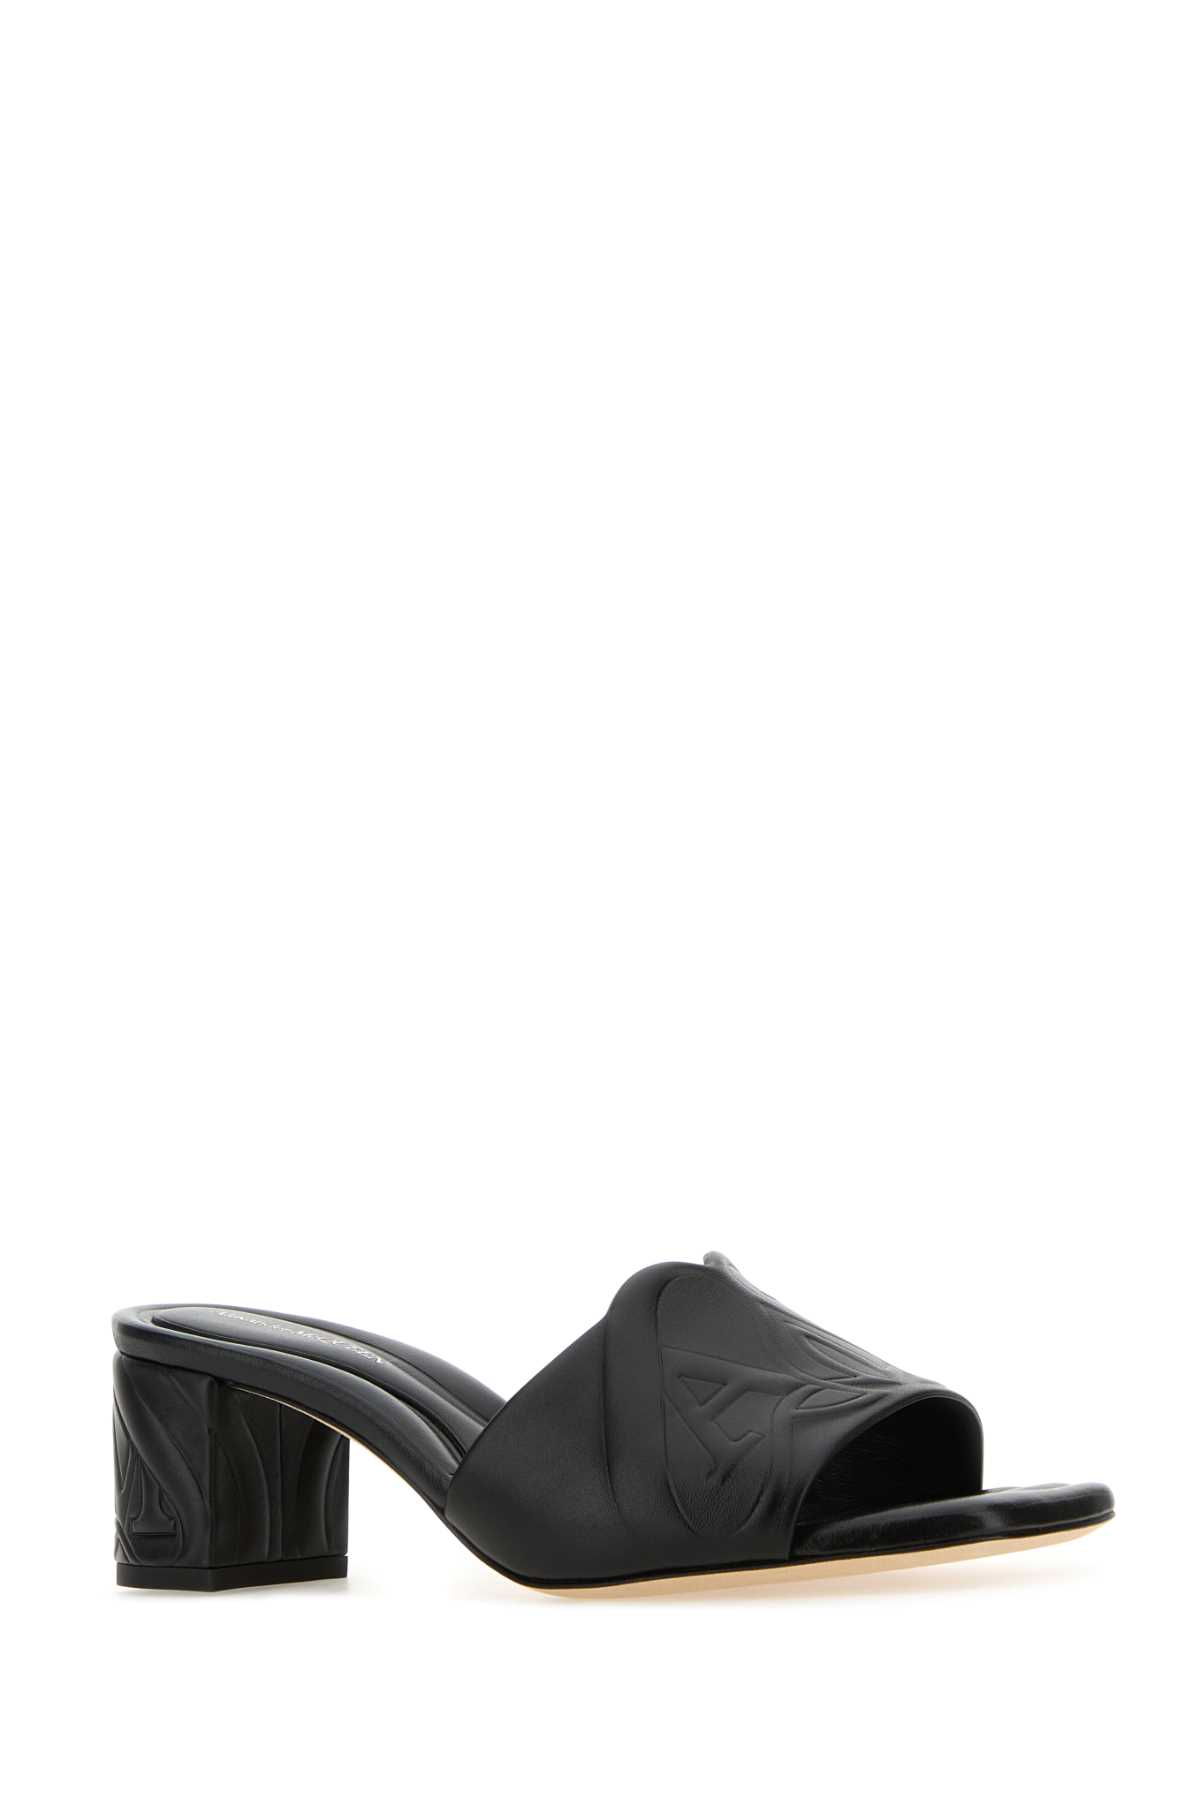 Alexander Mcqueen Black Leather Seal Mules